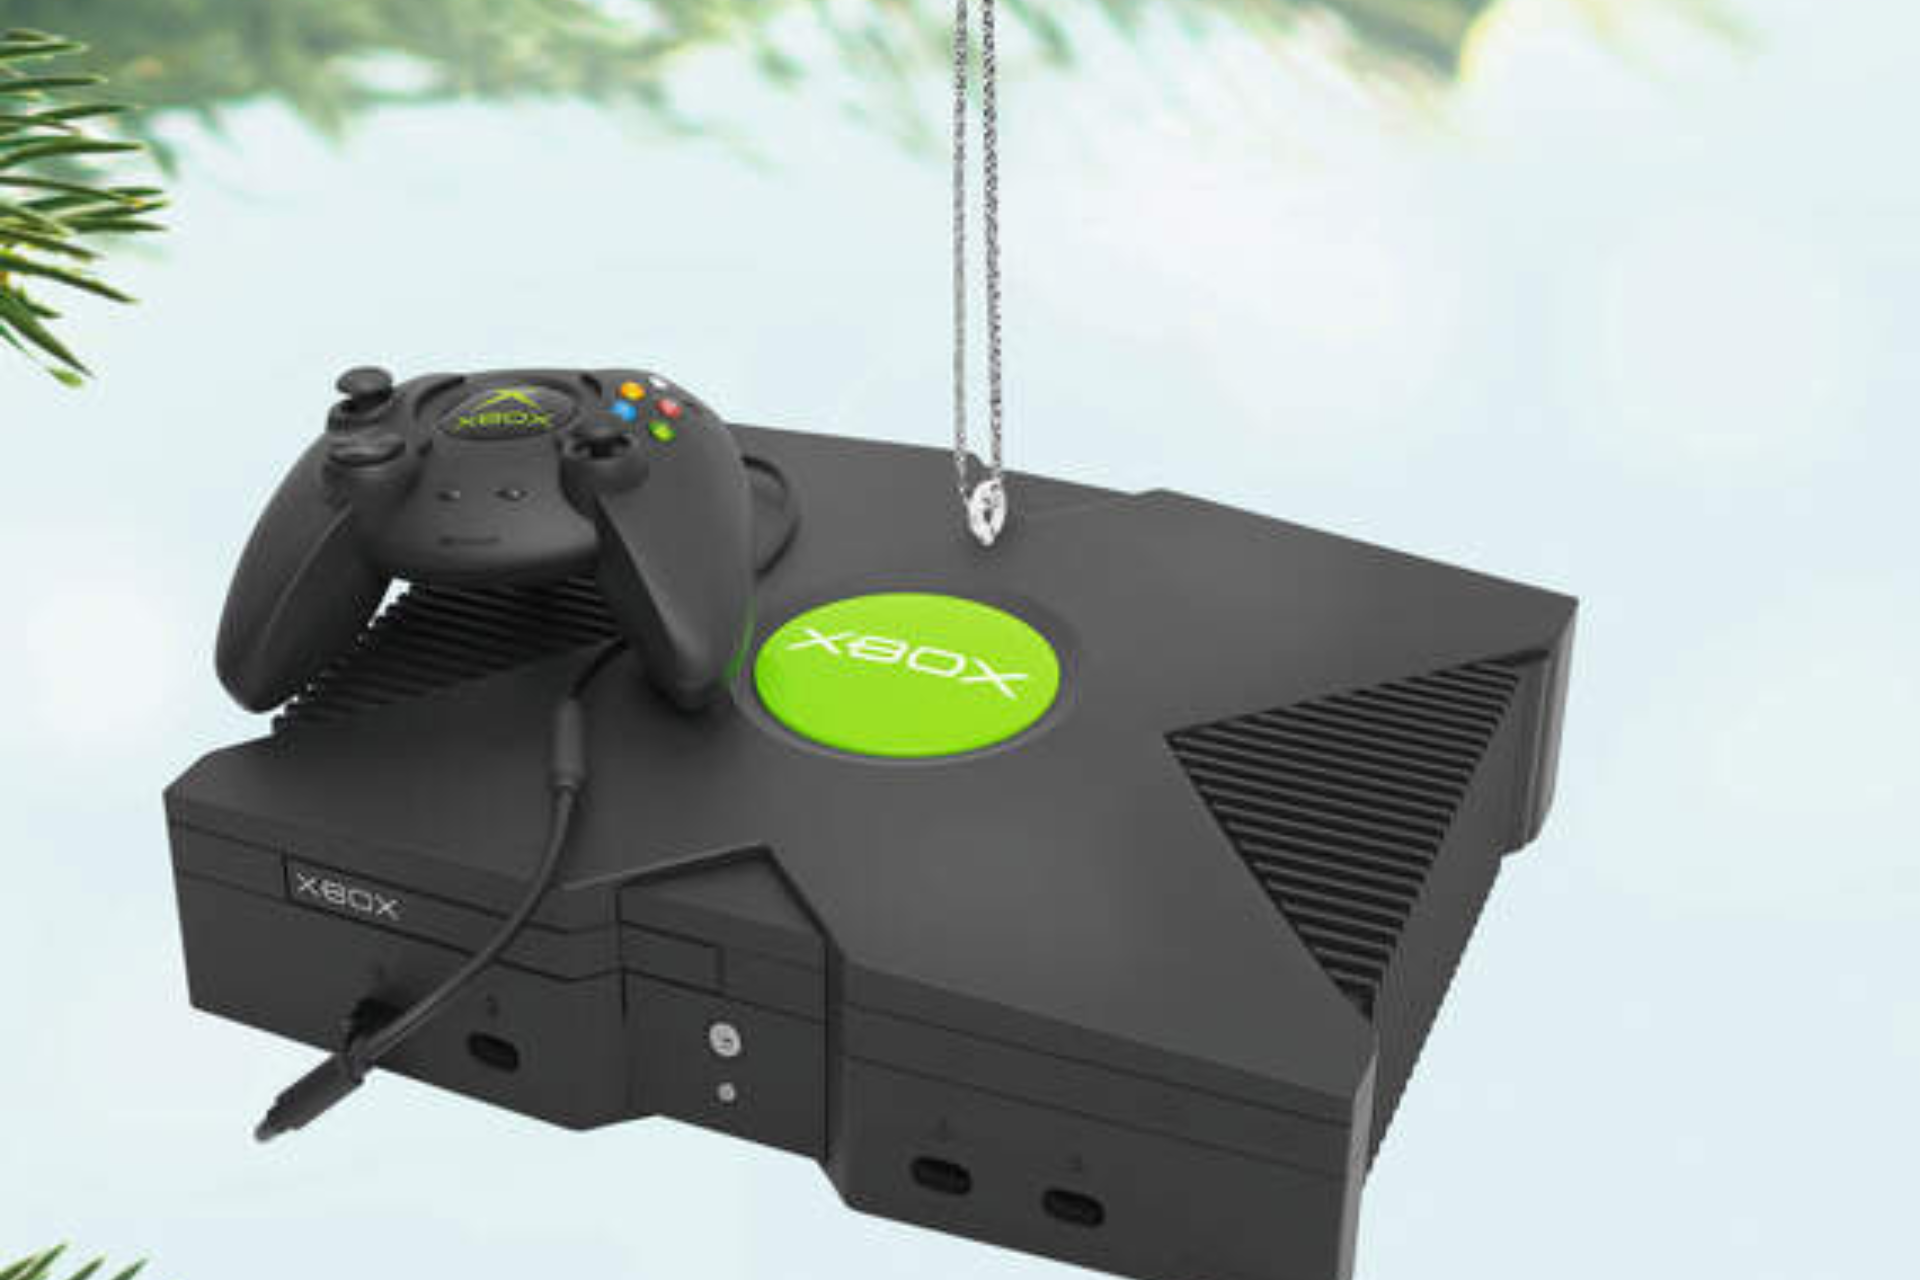 Soon, you will be able to buy an Xbox Console Ornament from Hallmark